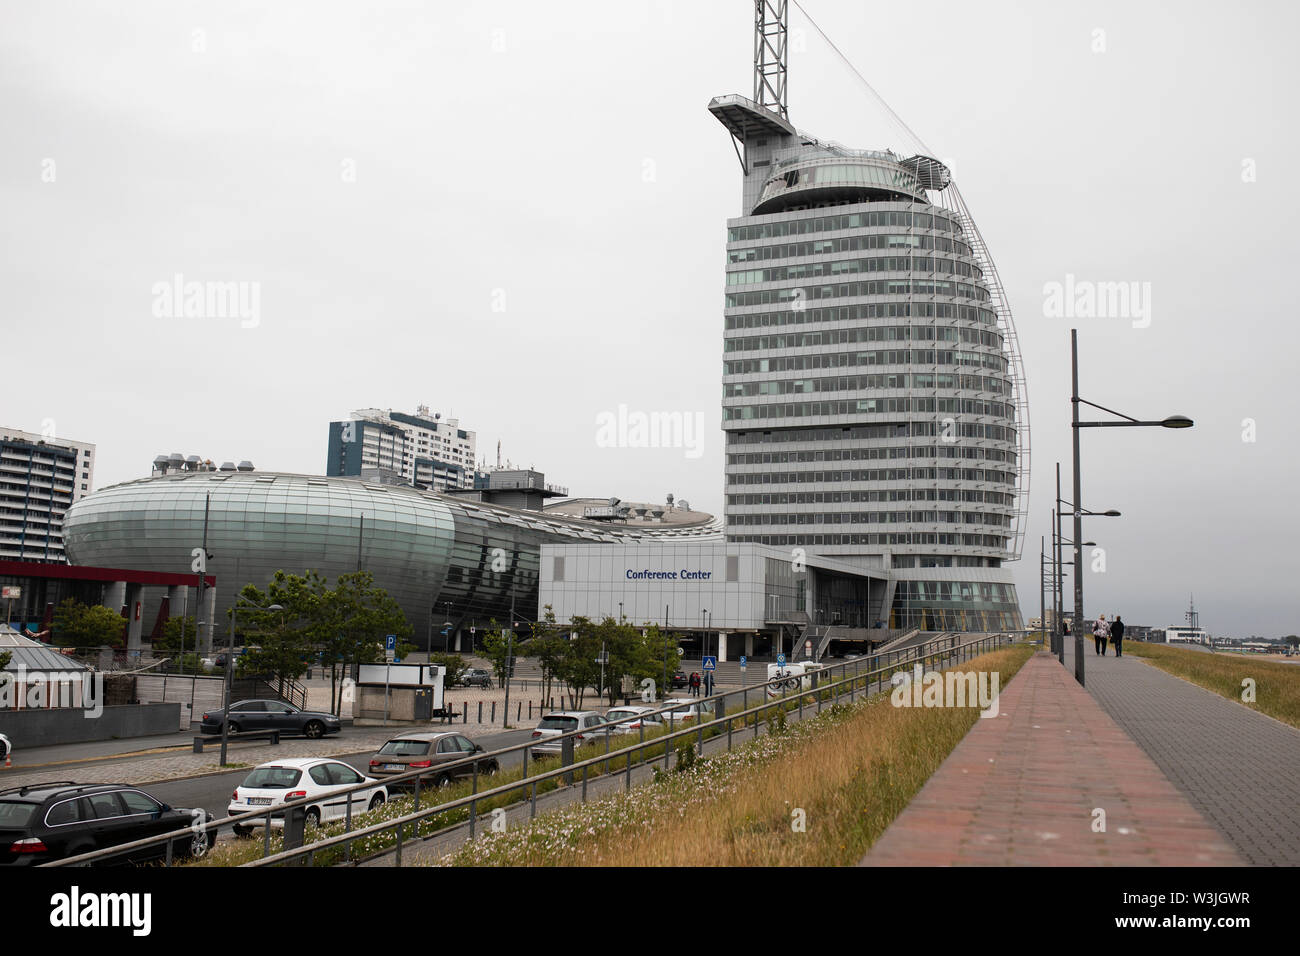 he conference center at Atlantic Hotel Sail City and the Klimahaus museum in Bremerhaven, Germany. Stock Photo